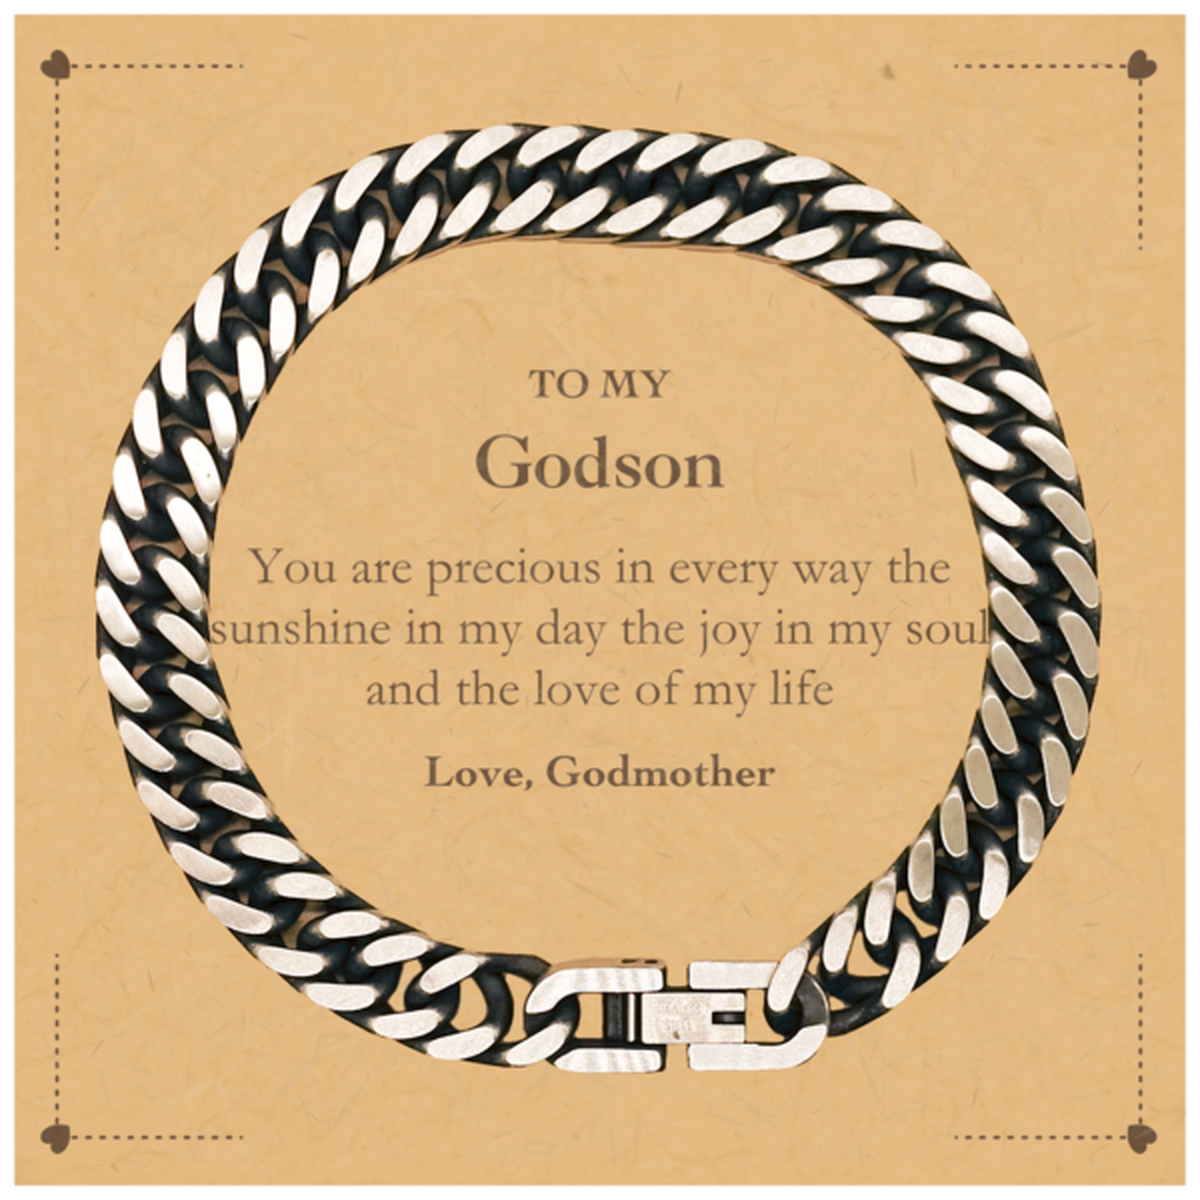 Graduation Gifts for Godson Cuban Link Chain Bracelet Present from Godmother, Christmas Godson Birthday Gifts Godson You are precious in every way the sunshine in my day. Love, Godmother